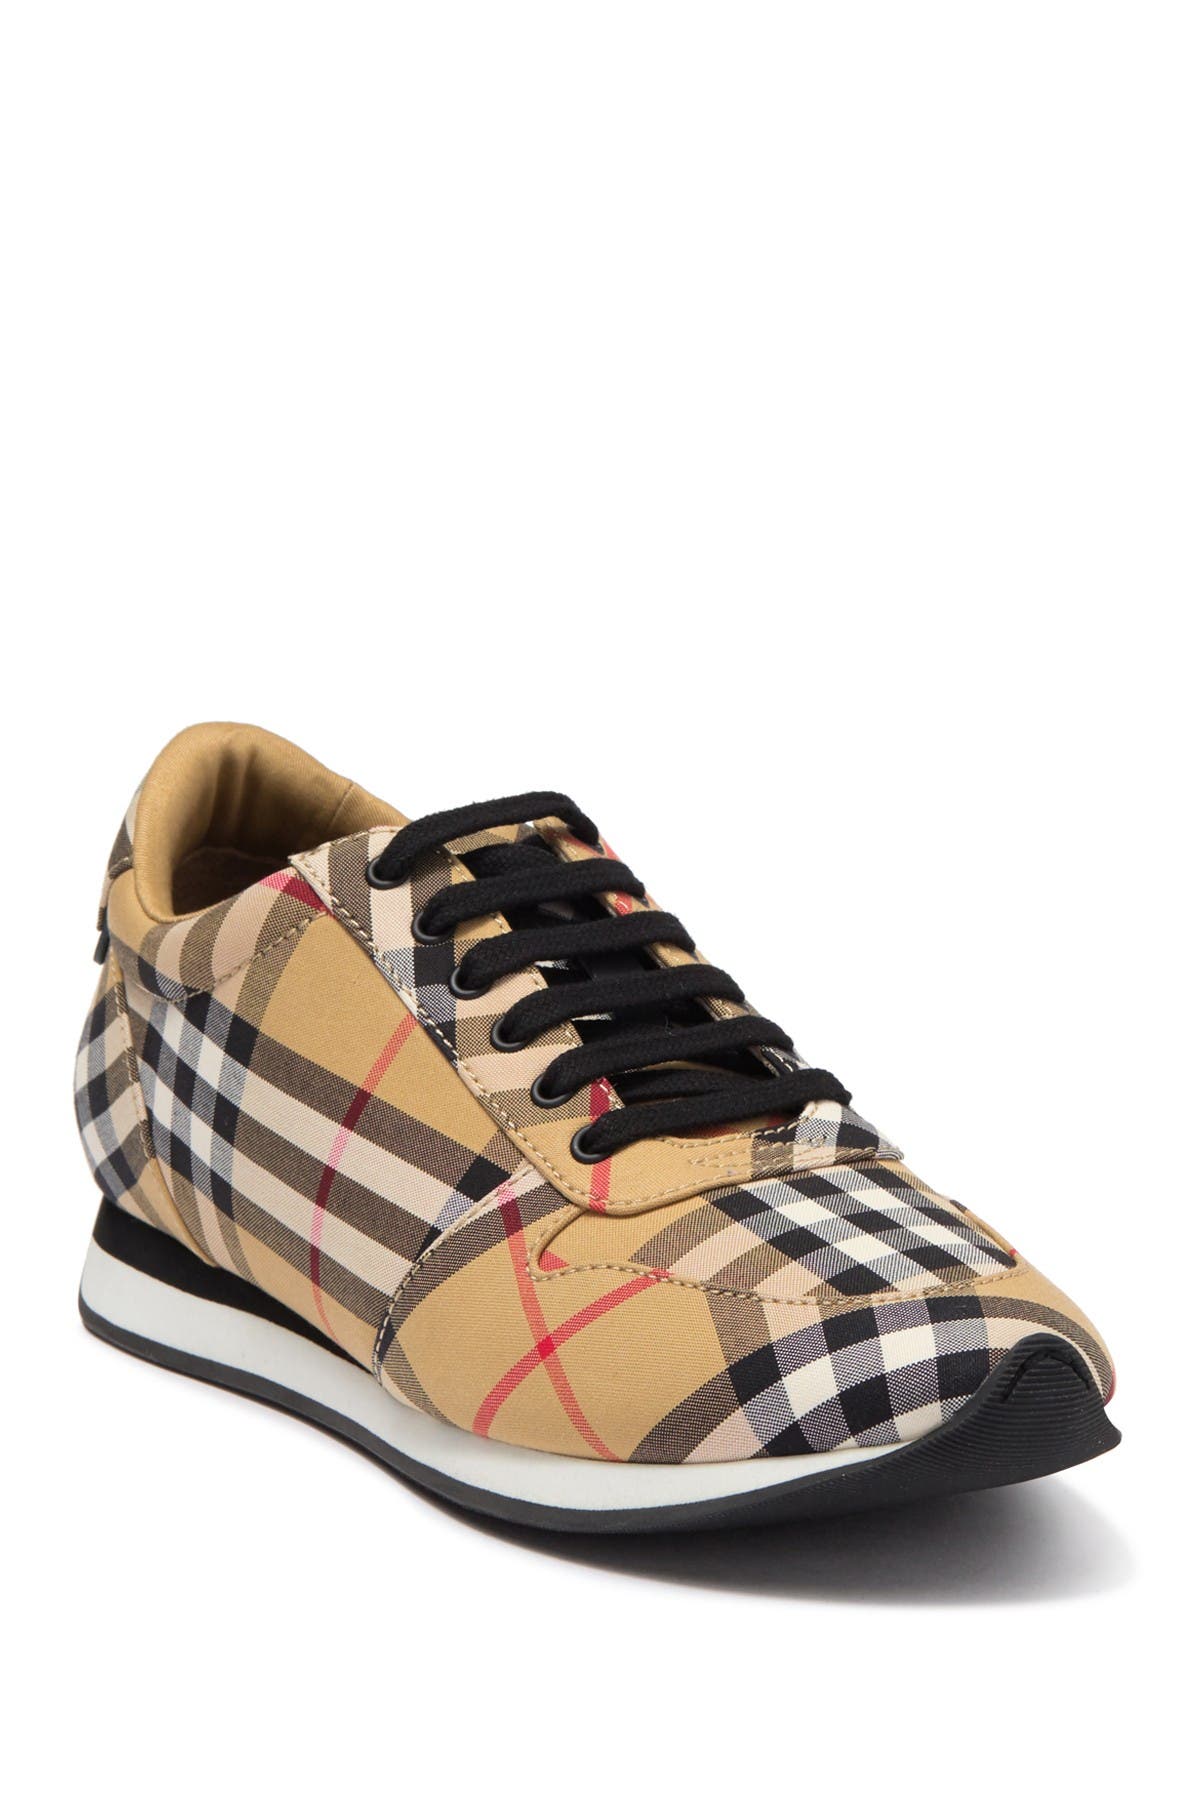 nordstrom rack burberry shoes